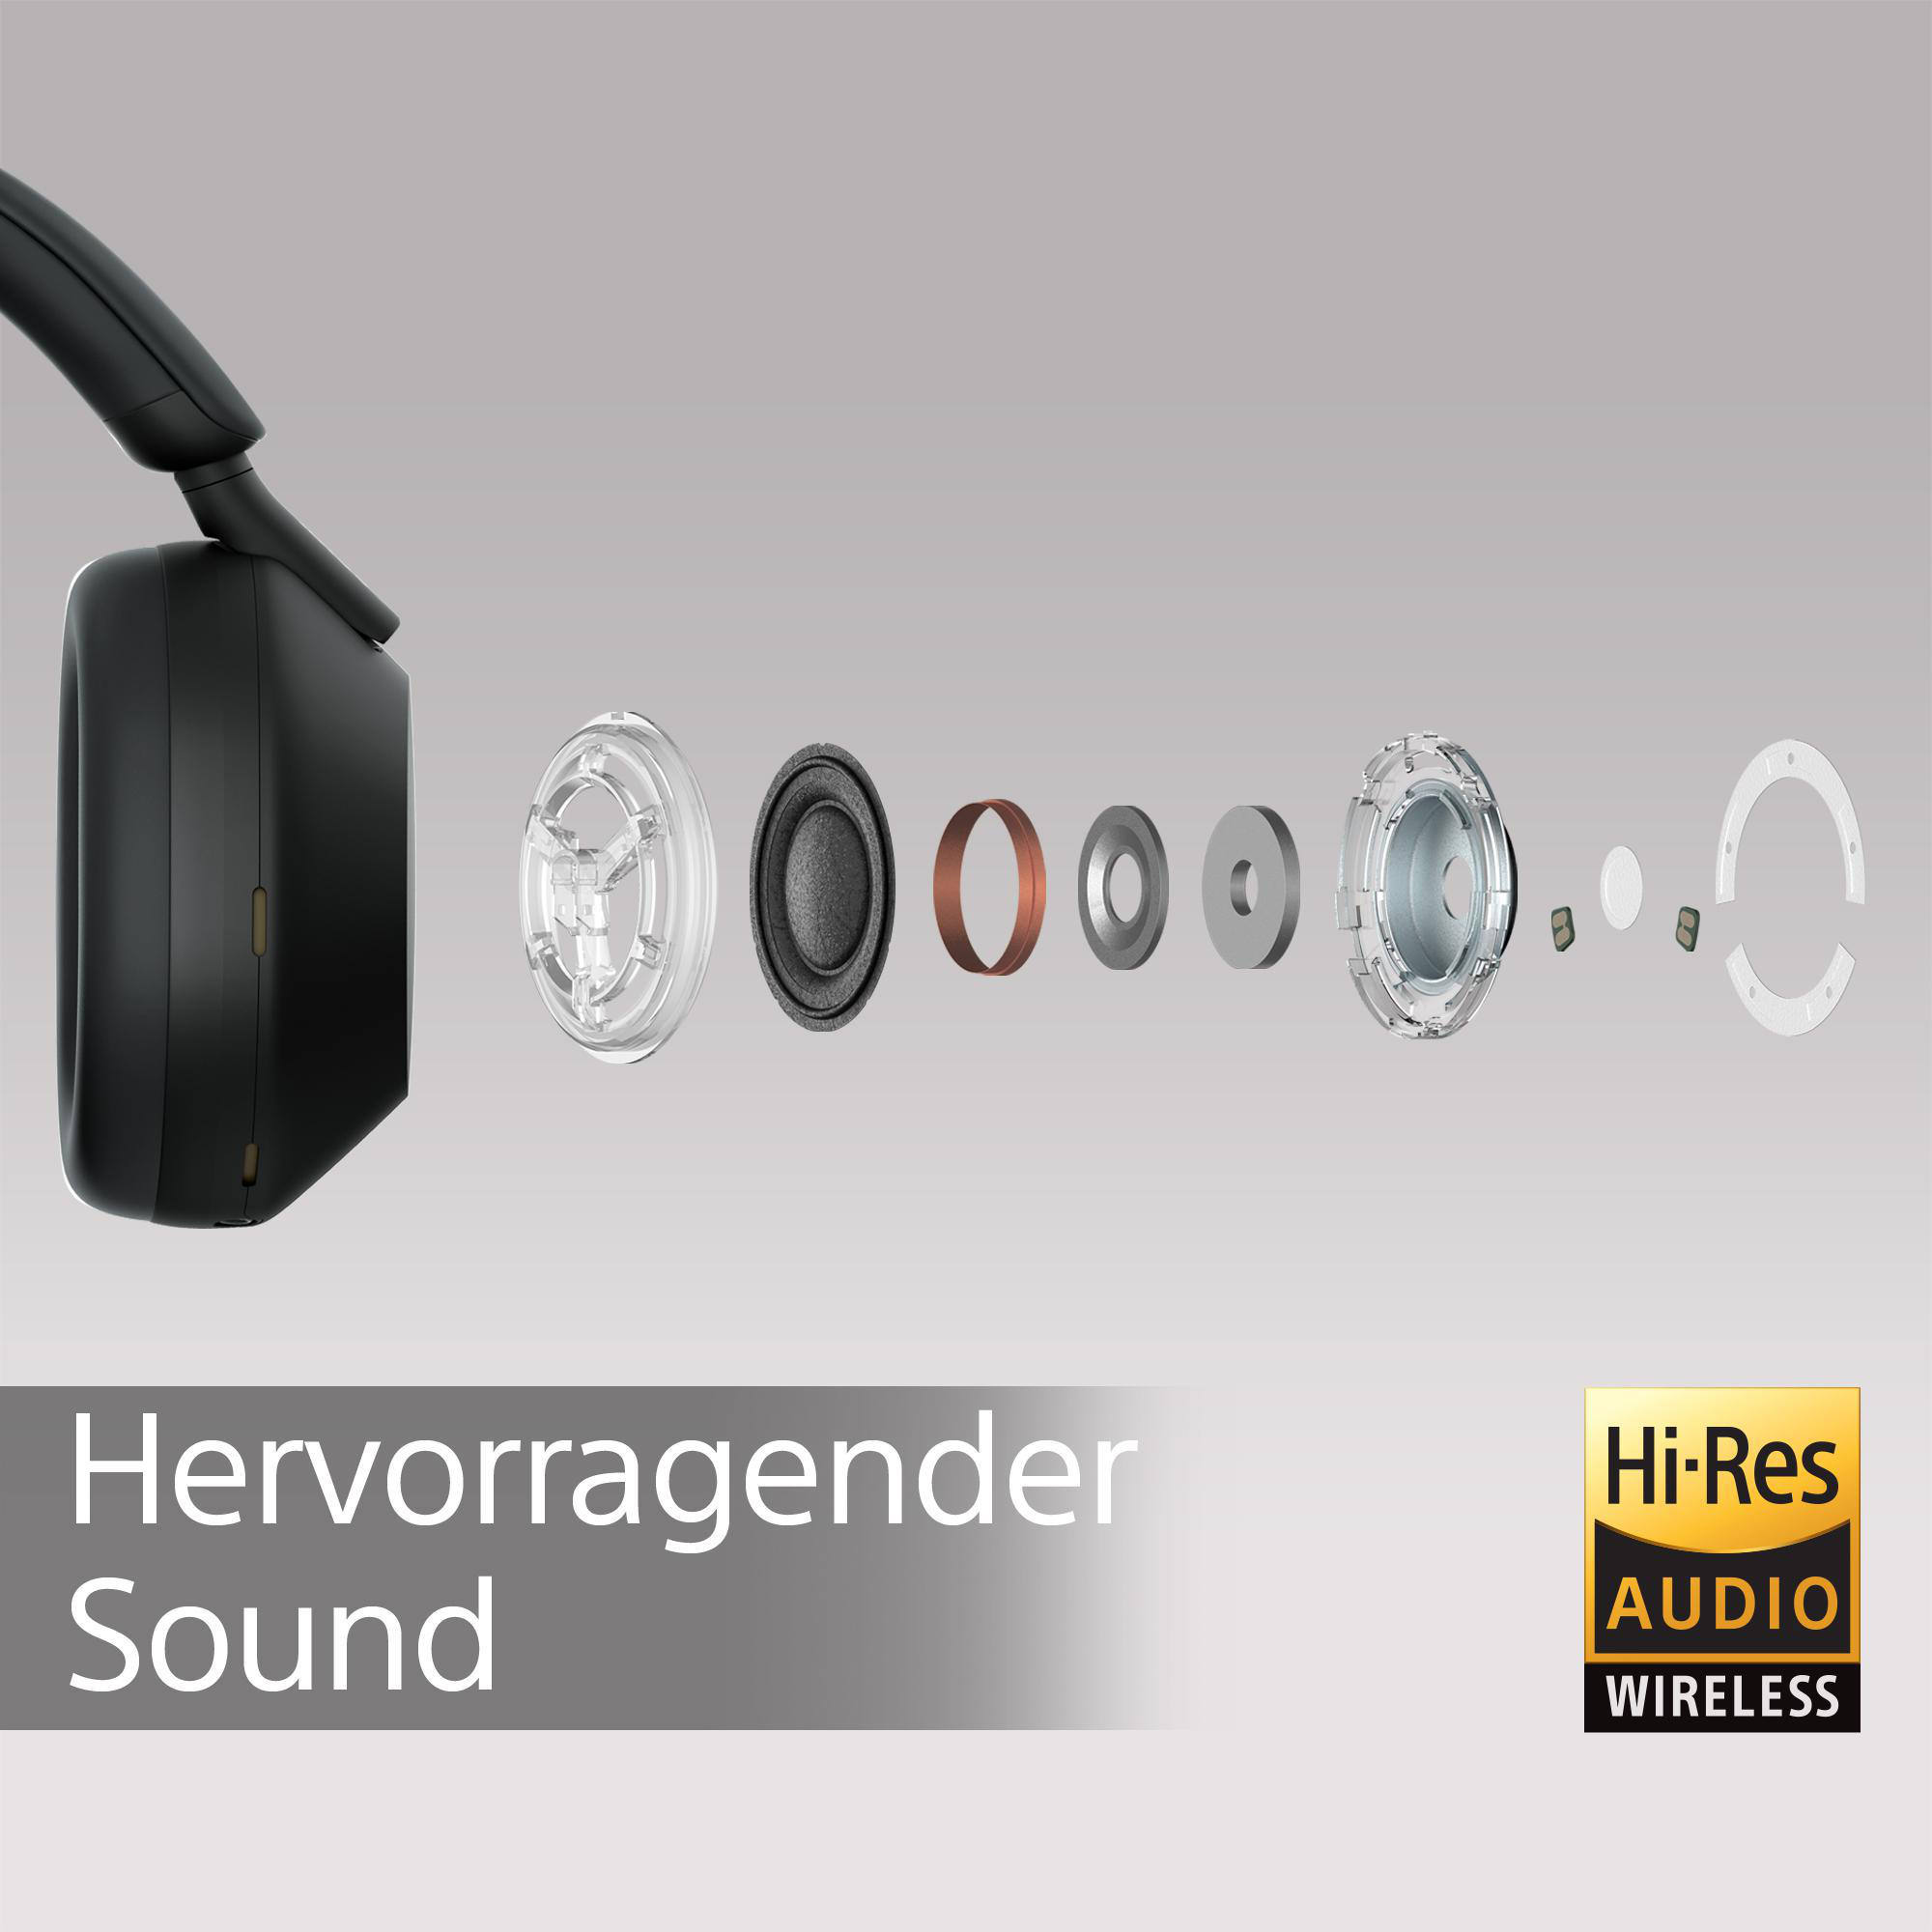 Silver Cancelling, Over-ear SONY Kopfhörer WH-1000XM5, Bluetooth Noise